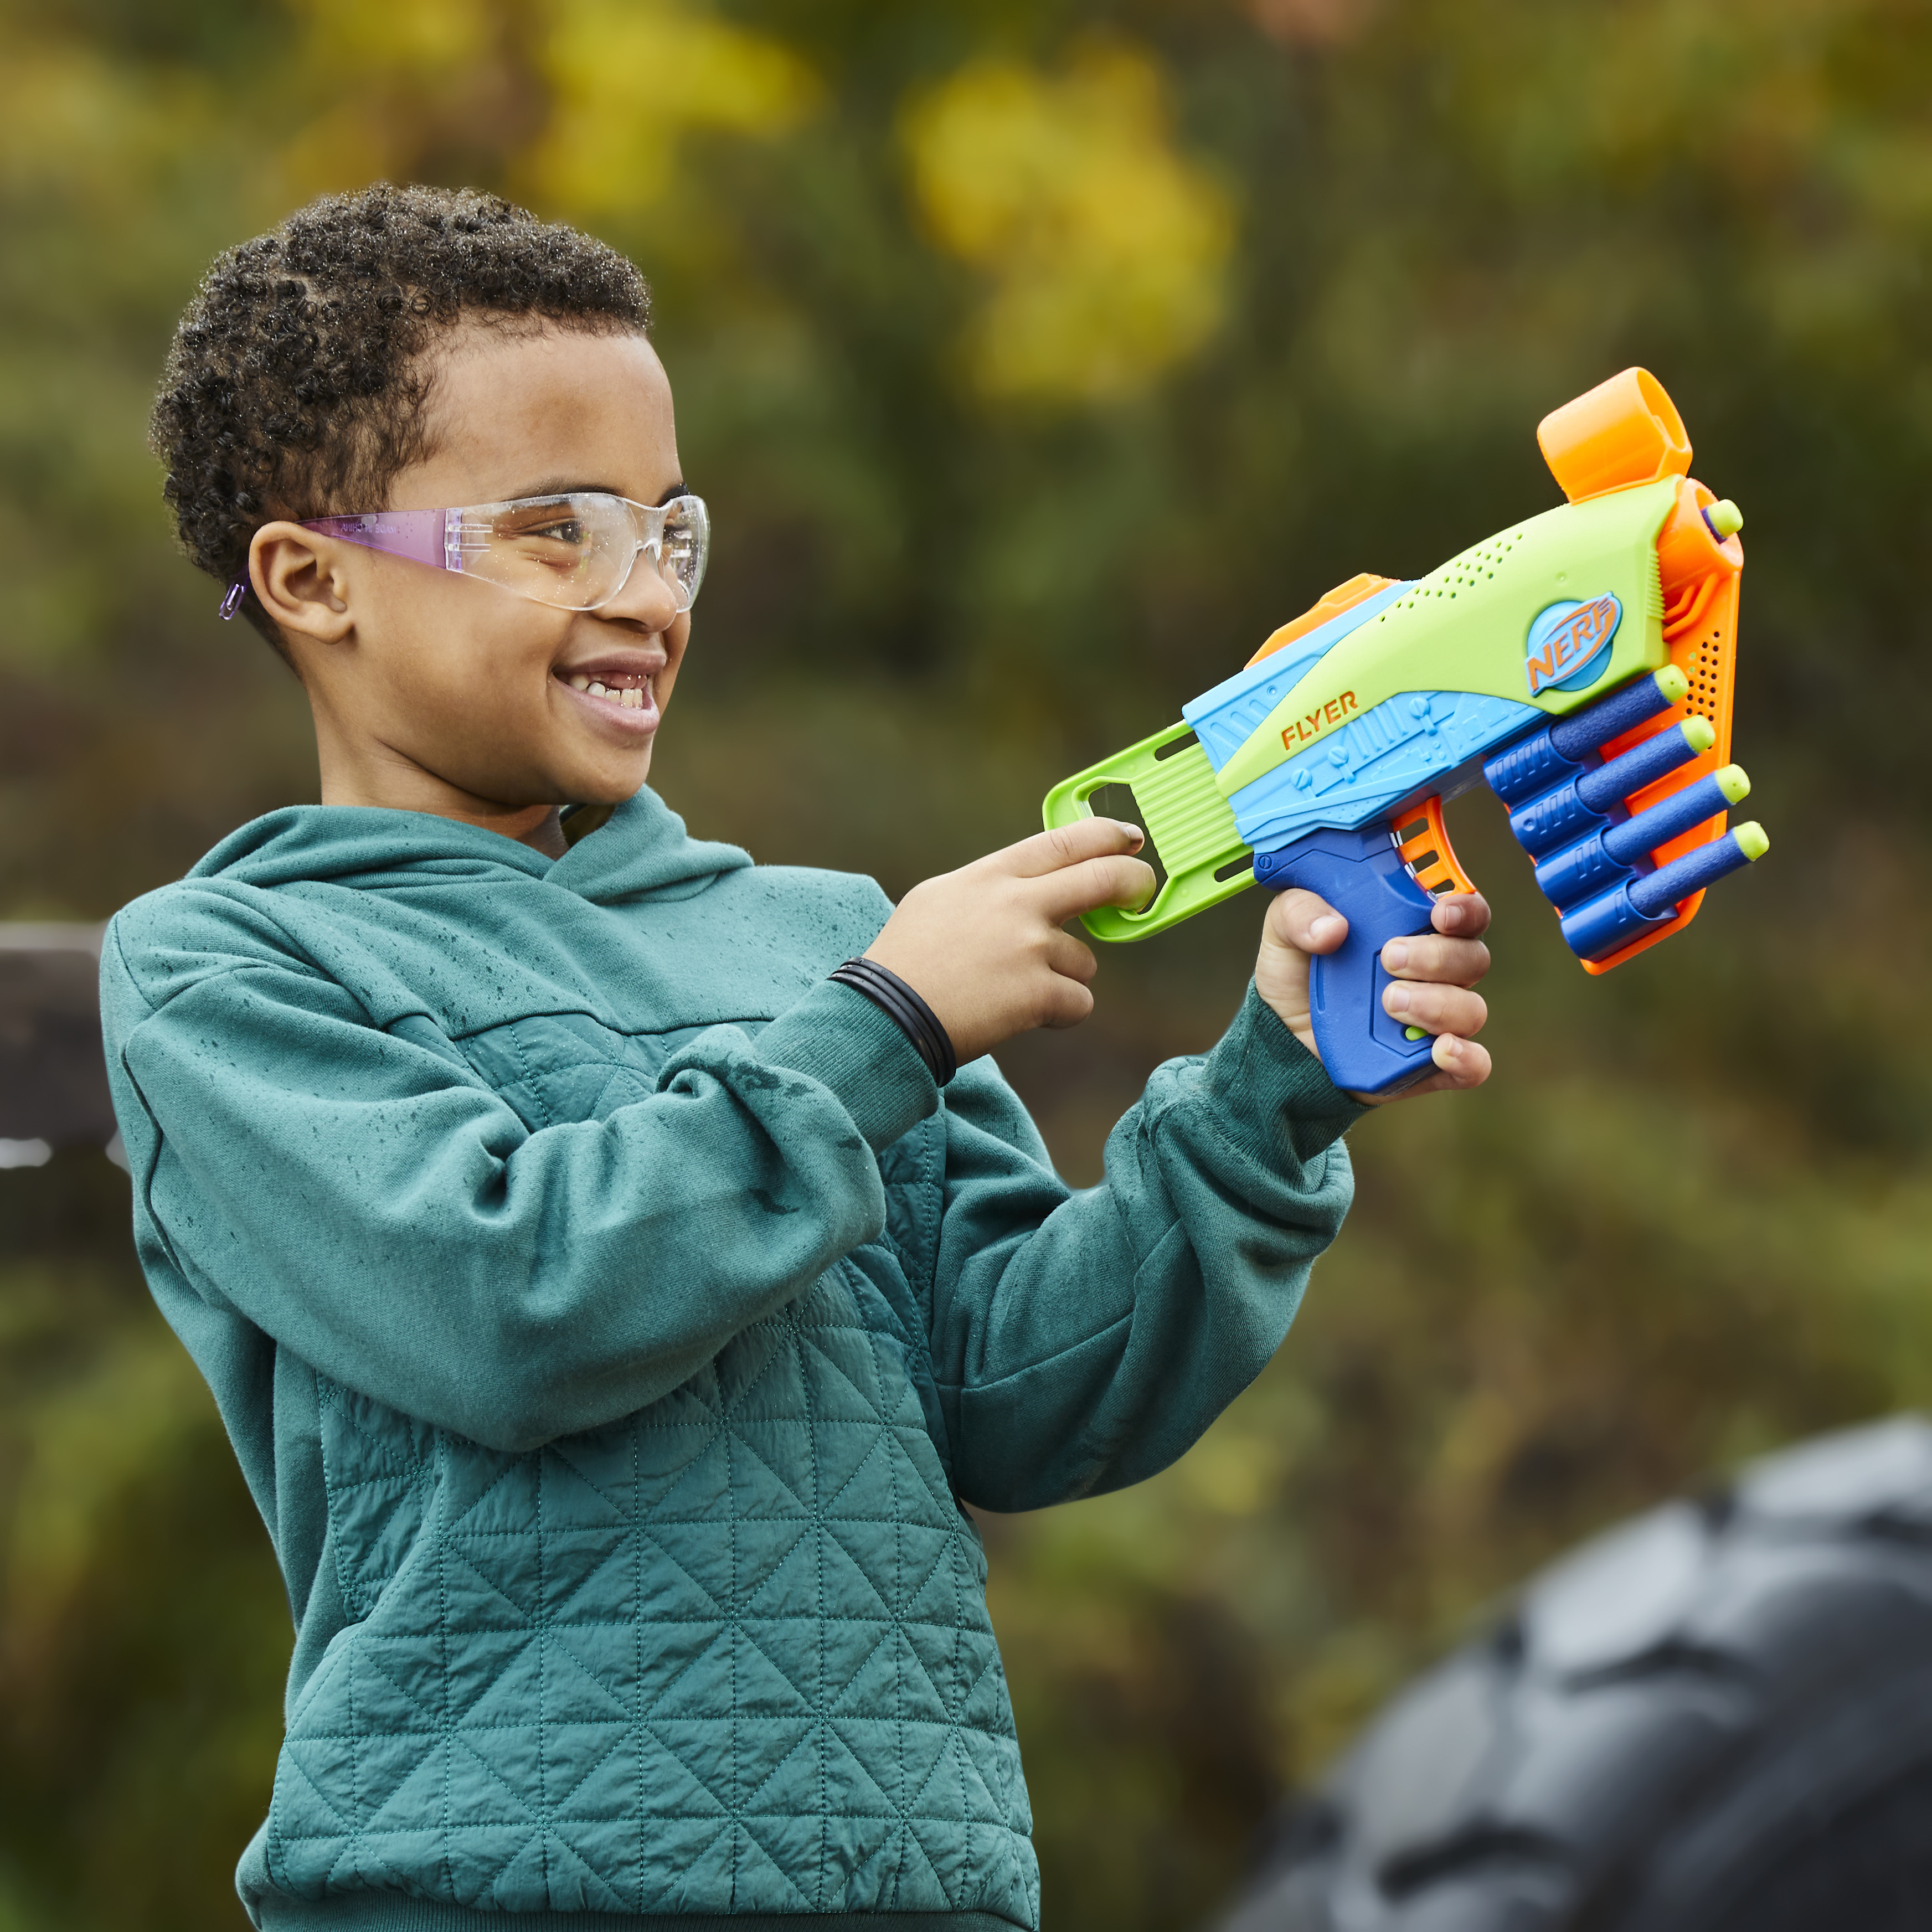 Nerf Junior Launches Campaign for Junior Blasters via Rasic and Partners